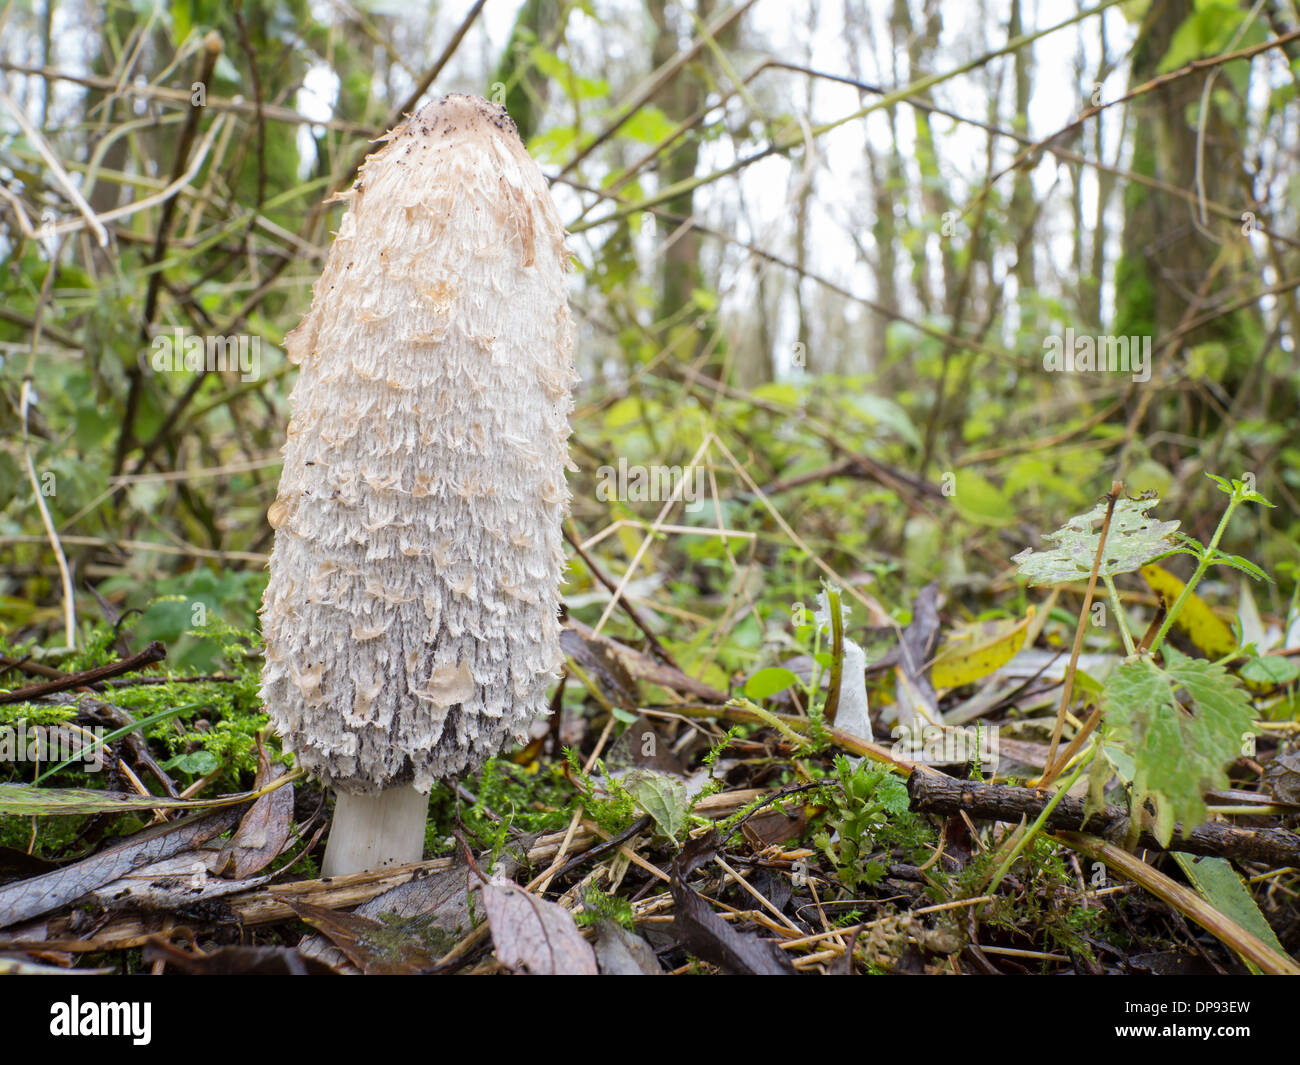 Coprinus comatus fungus commonly known as shaggy ink cap of lawyer's wig changes colour and turns black when fullgrown Stock Photo